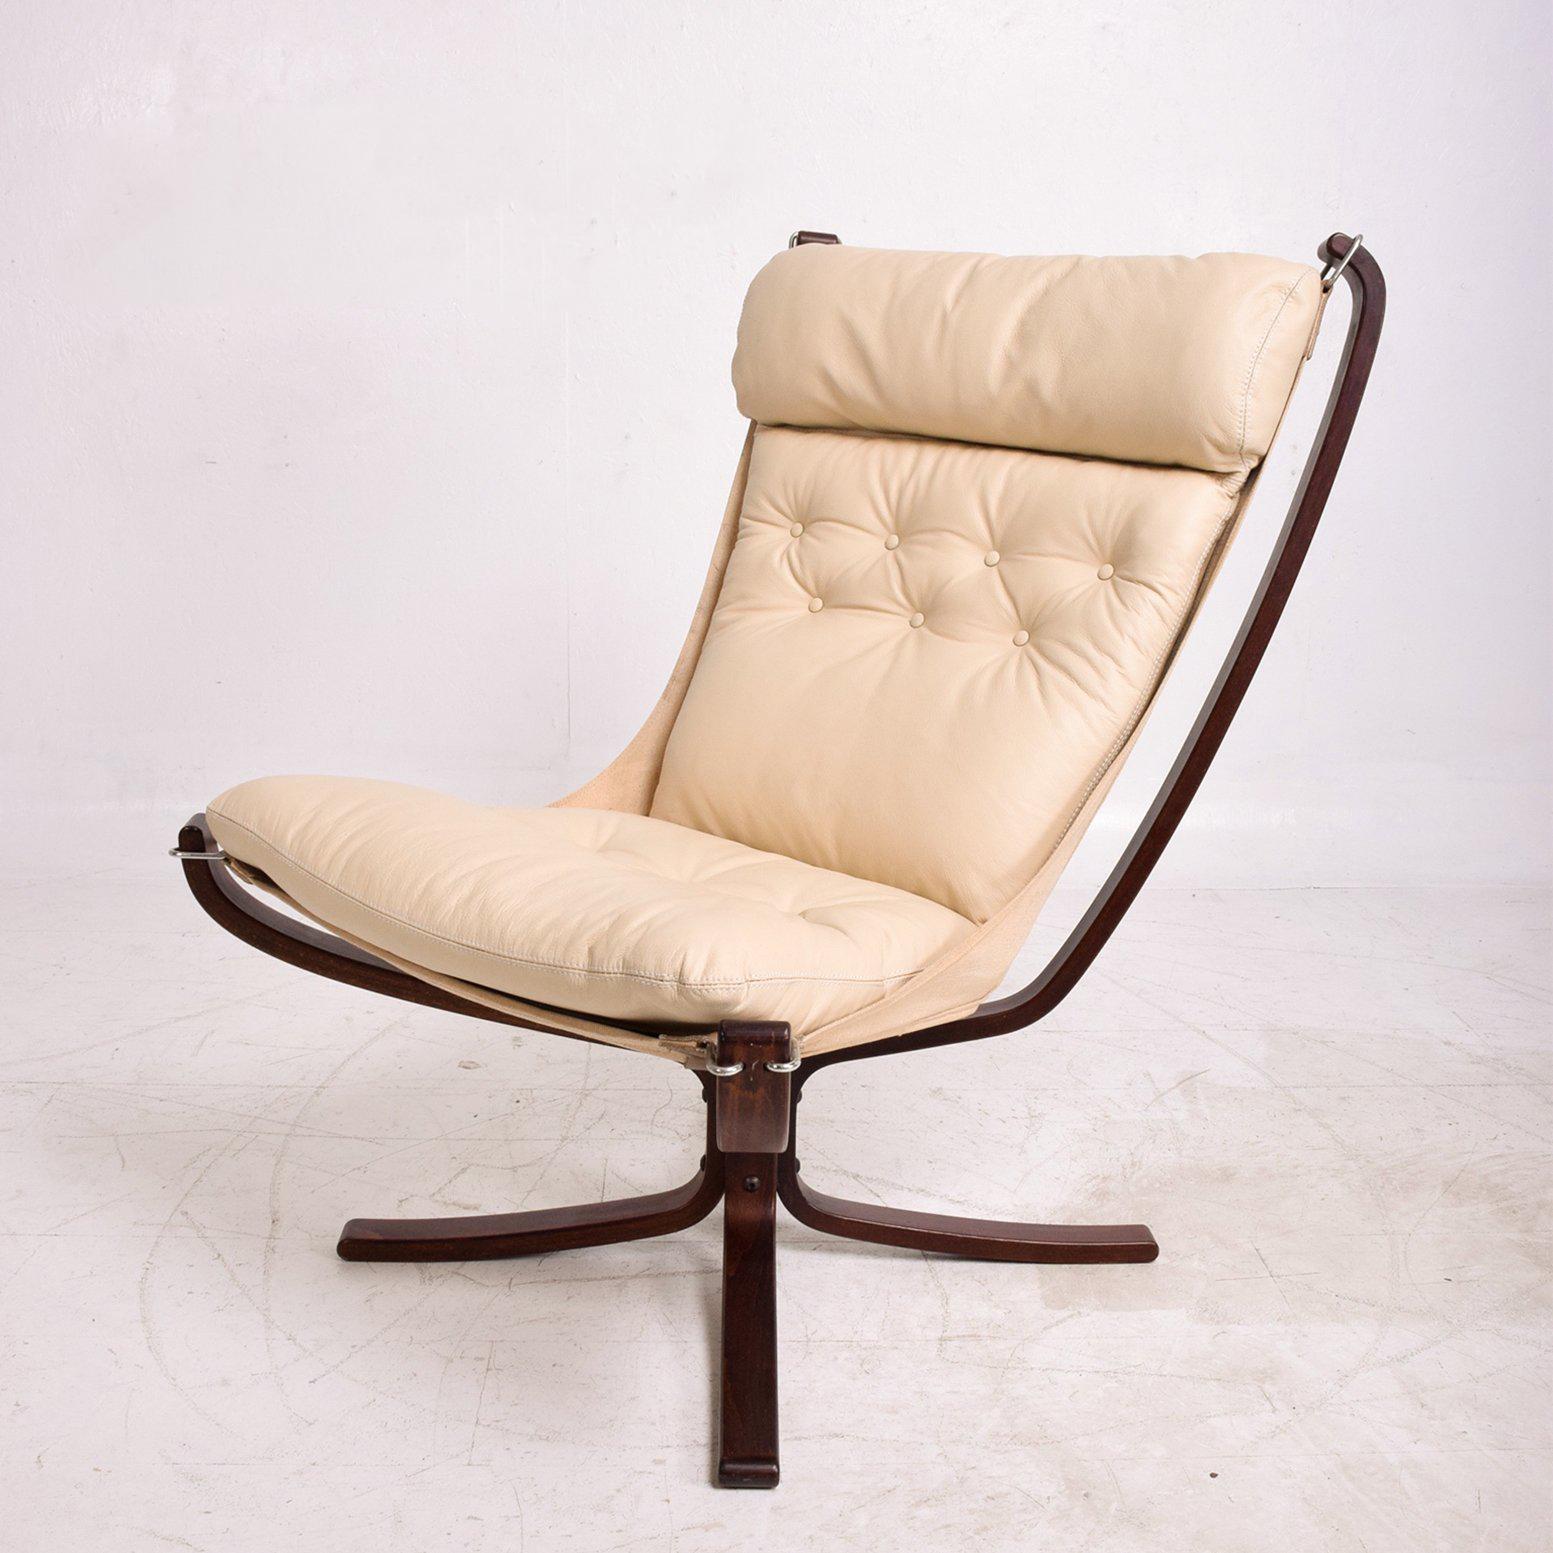 For your consideration a vintage Falcon lounge chair by Westnofa.
Norway circa 1960s. Bentwood legs in sculptural shape in dark rosewood stain. (Original). Canvas has aged sun fade. New leather cushion in ivory color. 

Measures: 38 3/8